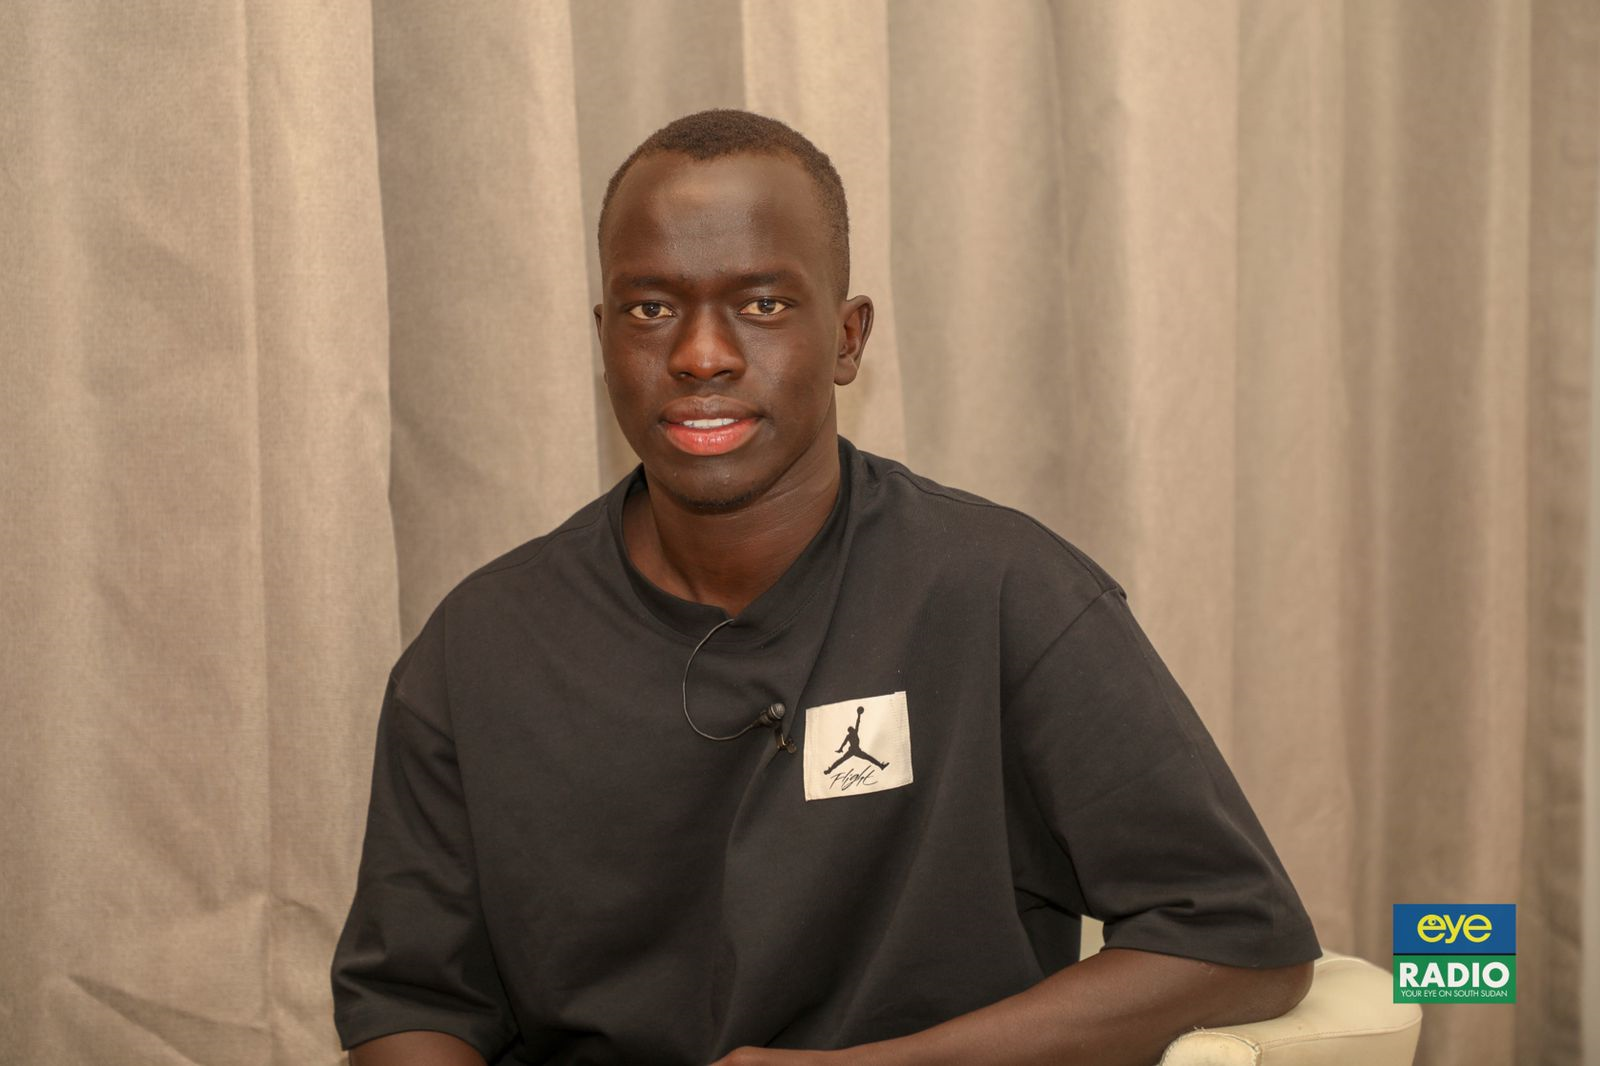 Footballer Mabil tells youth to believe in their dreams